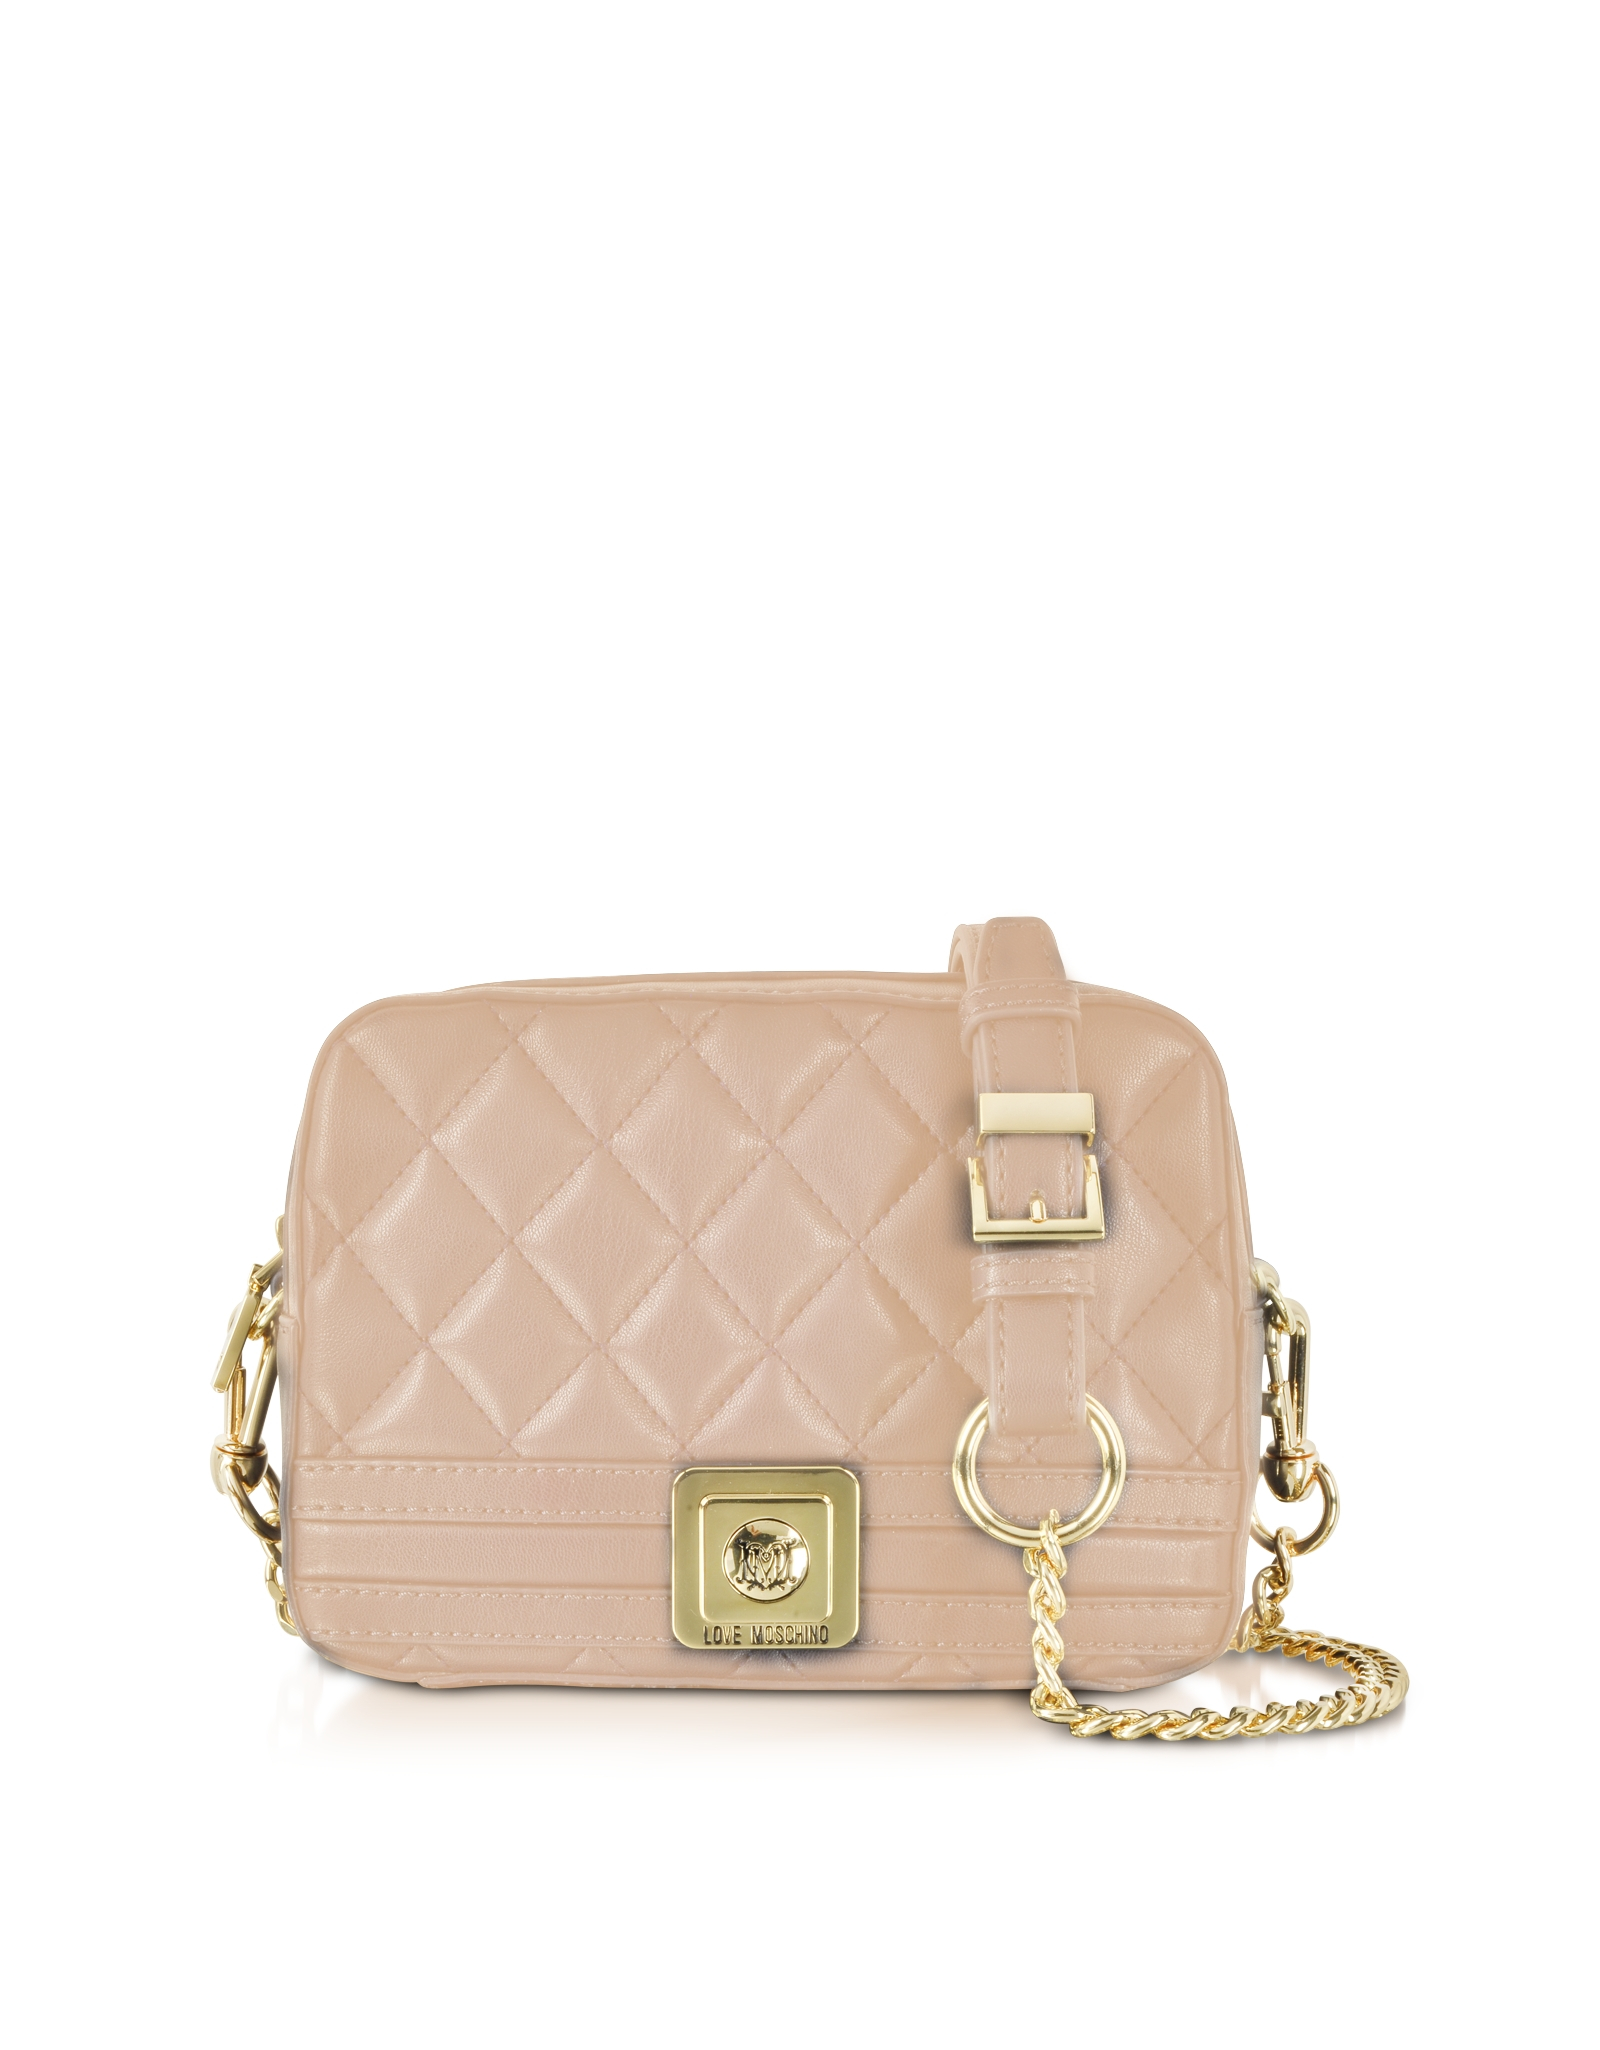 Lyst - Love Moschino Quilted Eco Leather Crossbody Bag in Pink